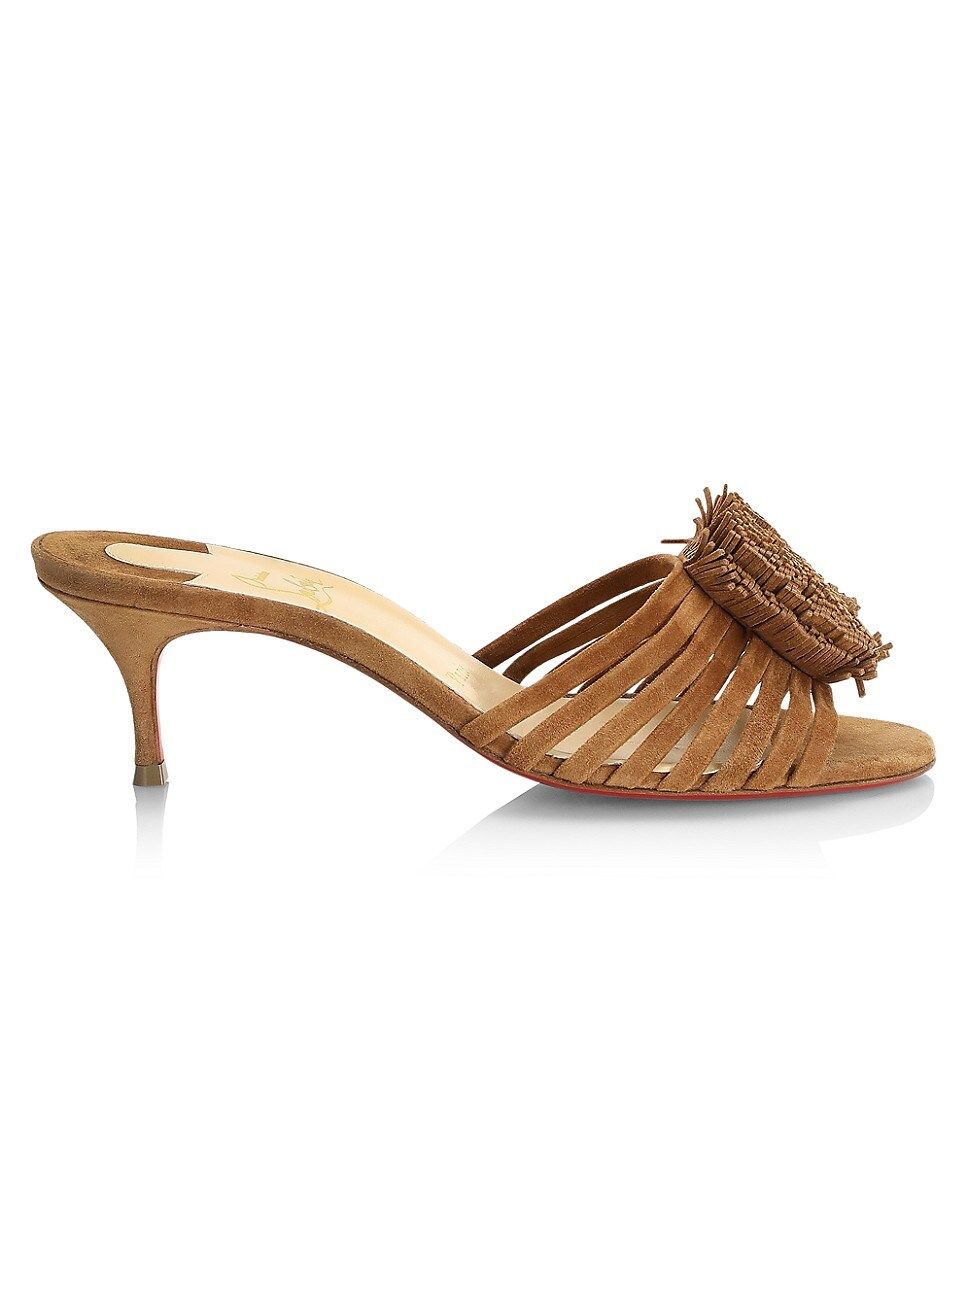 Christian Louboutin Women's Belbrossa Fringe Suede Mules - Biscotto - Size 9 | Saks Fifth Avenue